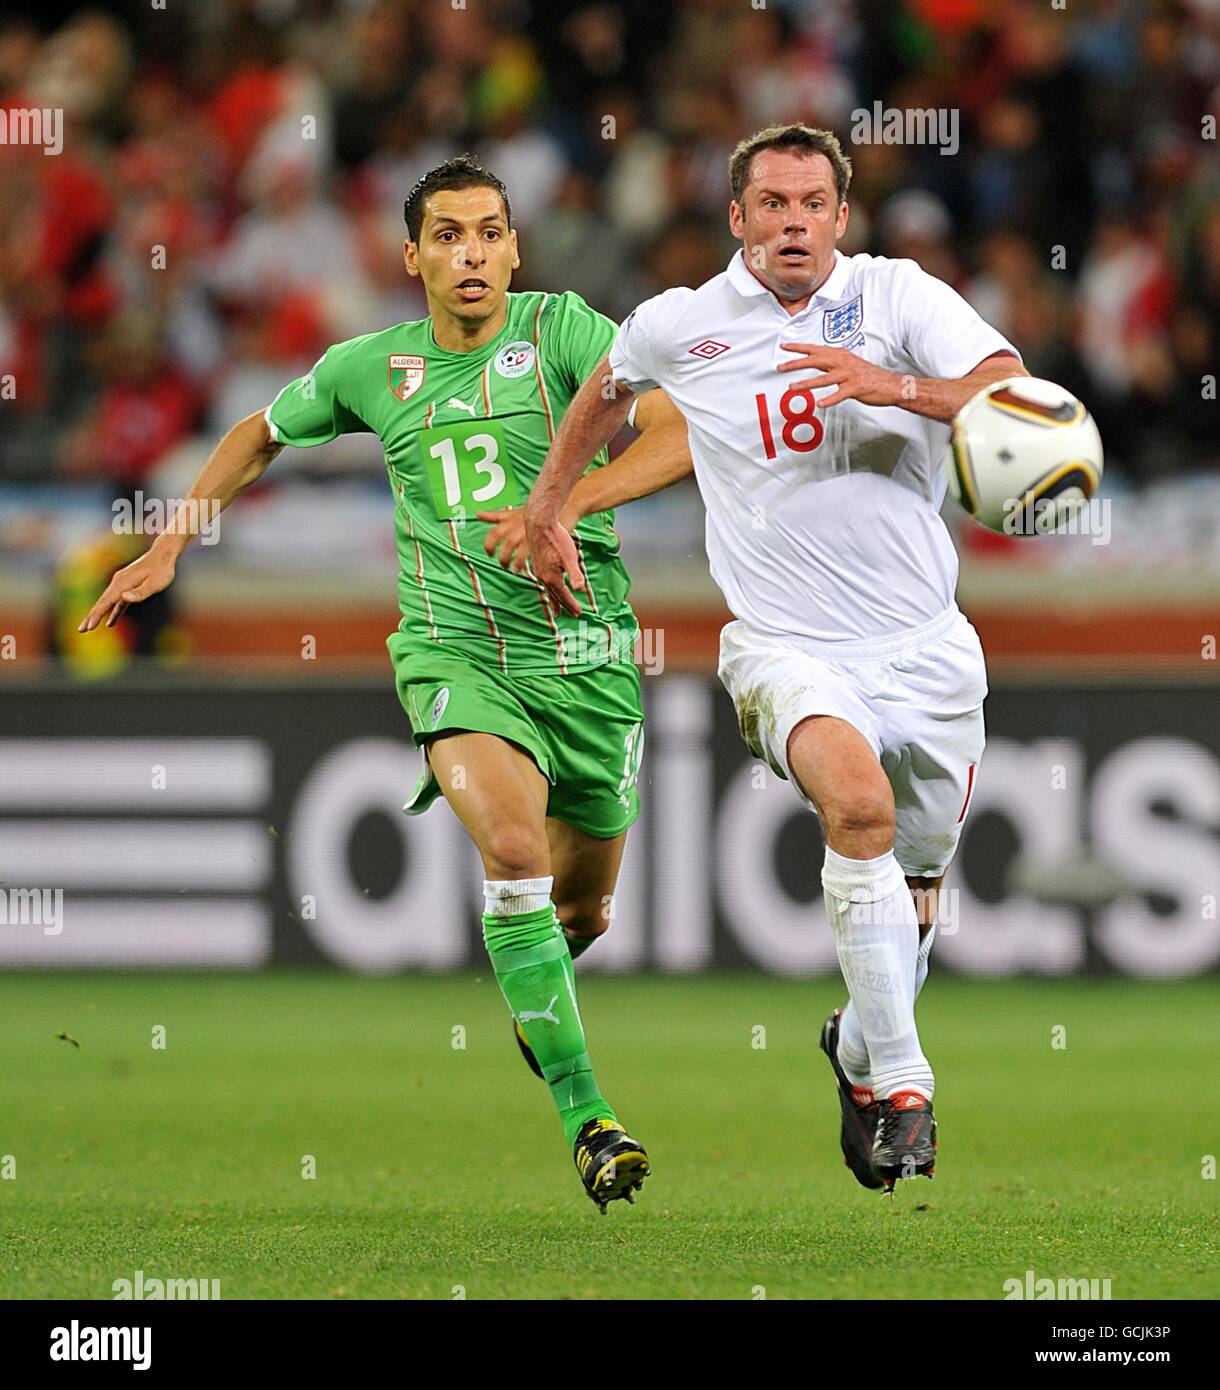 Soccer - 2010 FIFA World Cup South Africa - Group C - England v Algeria - Green Point Stadium. England's Jamie Carragher (right) gets away from Algeria's Karim Matmour Stock Photo